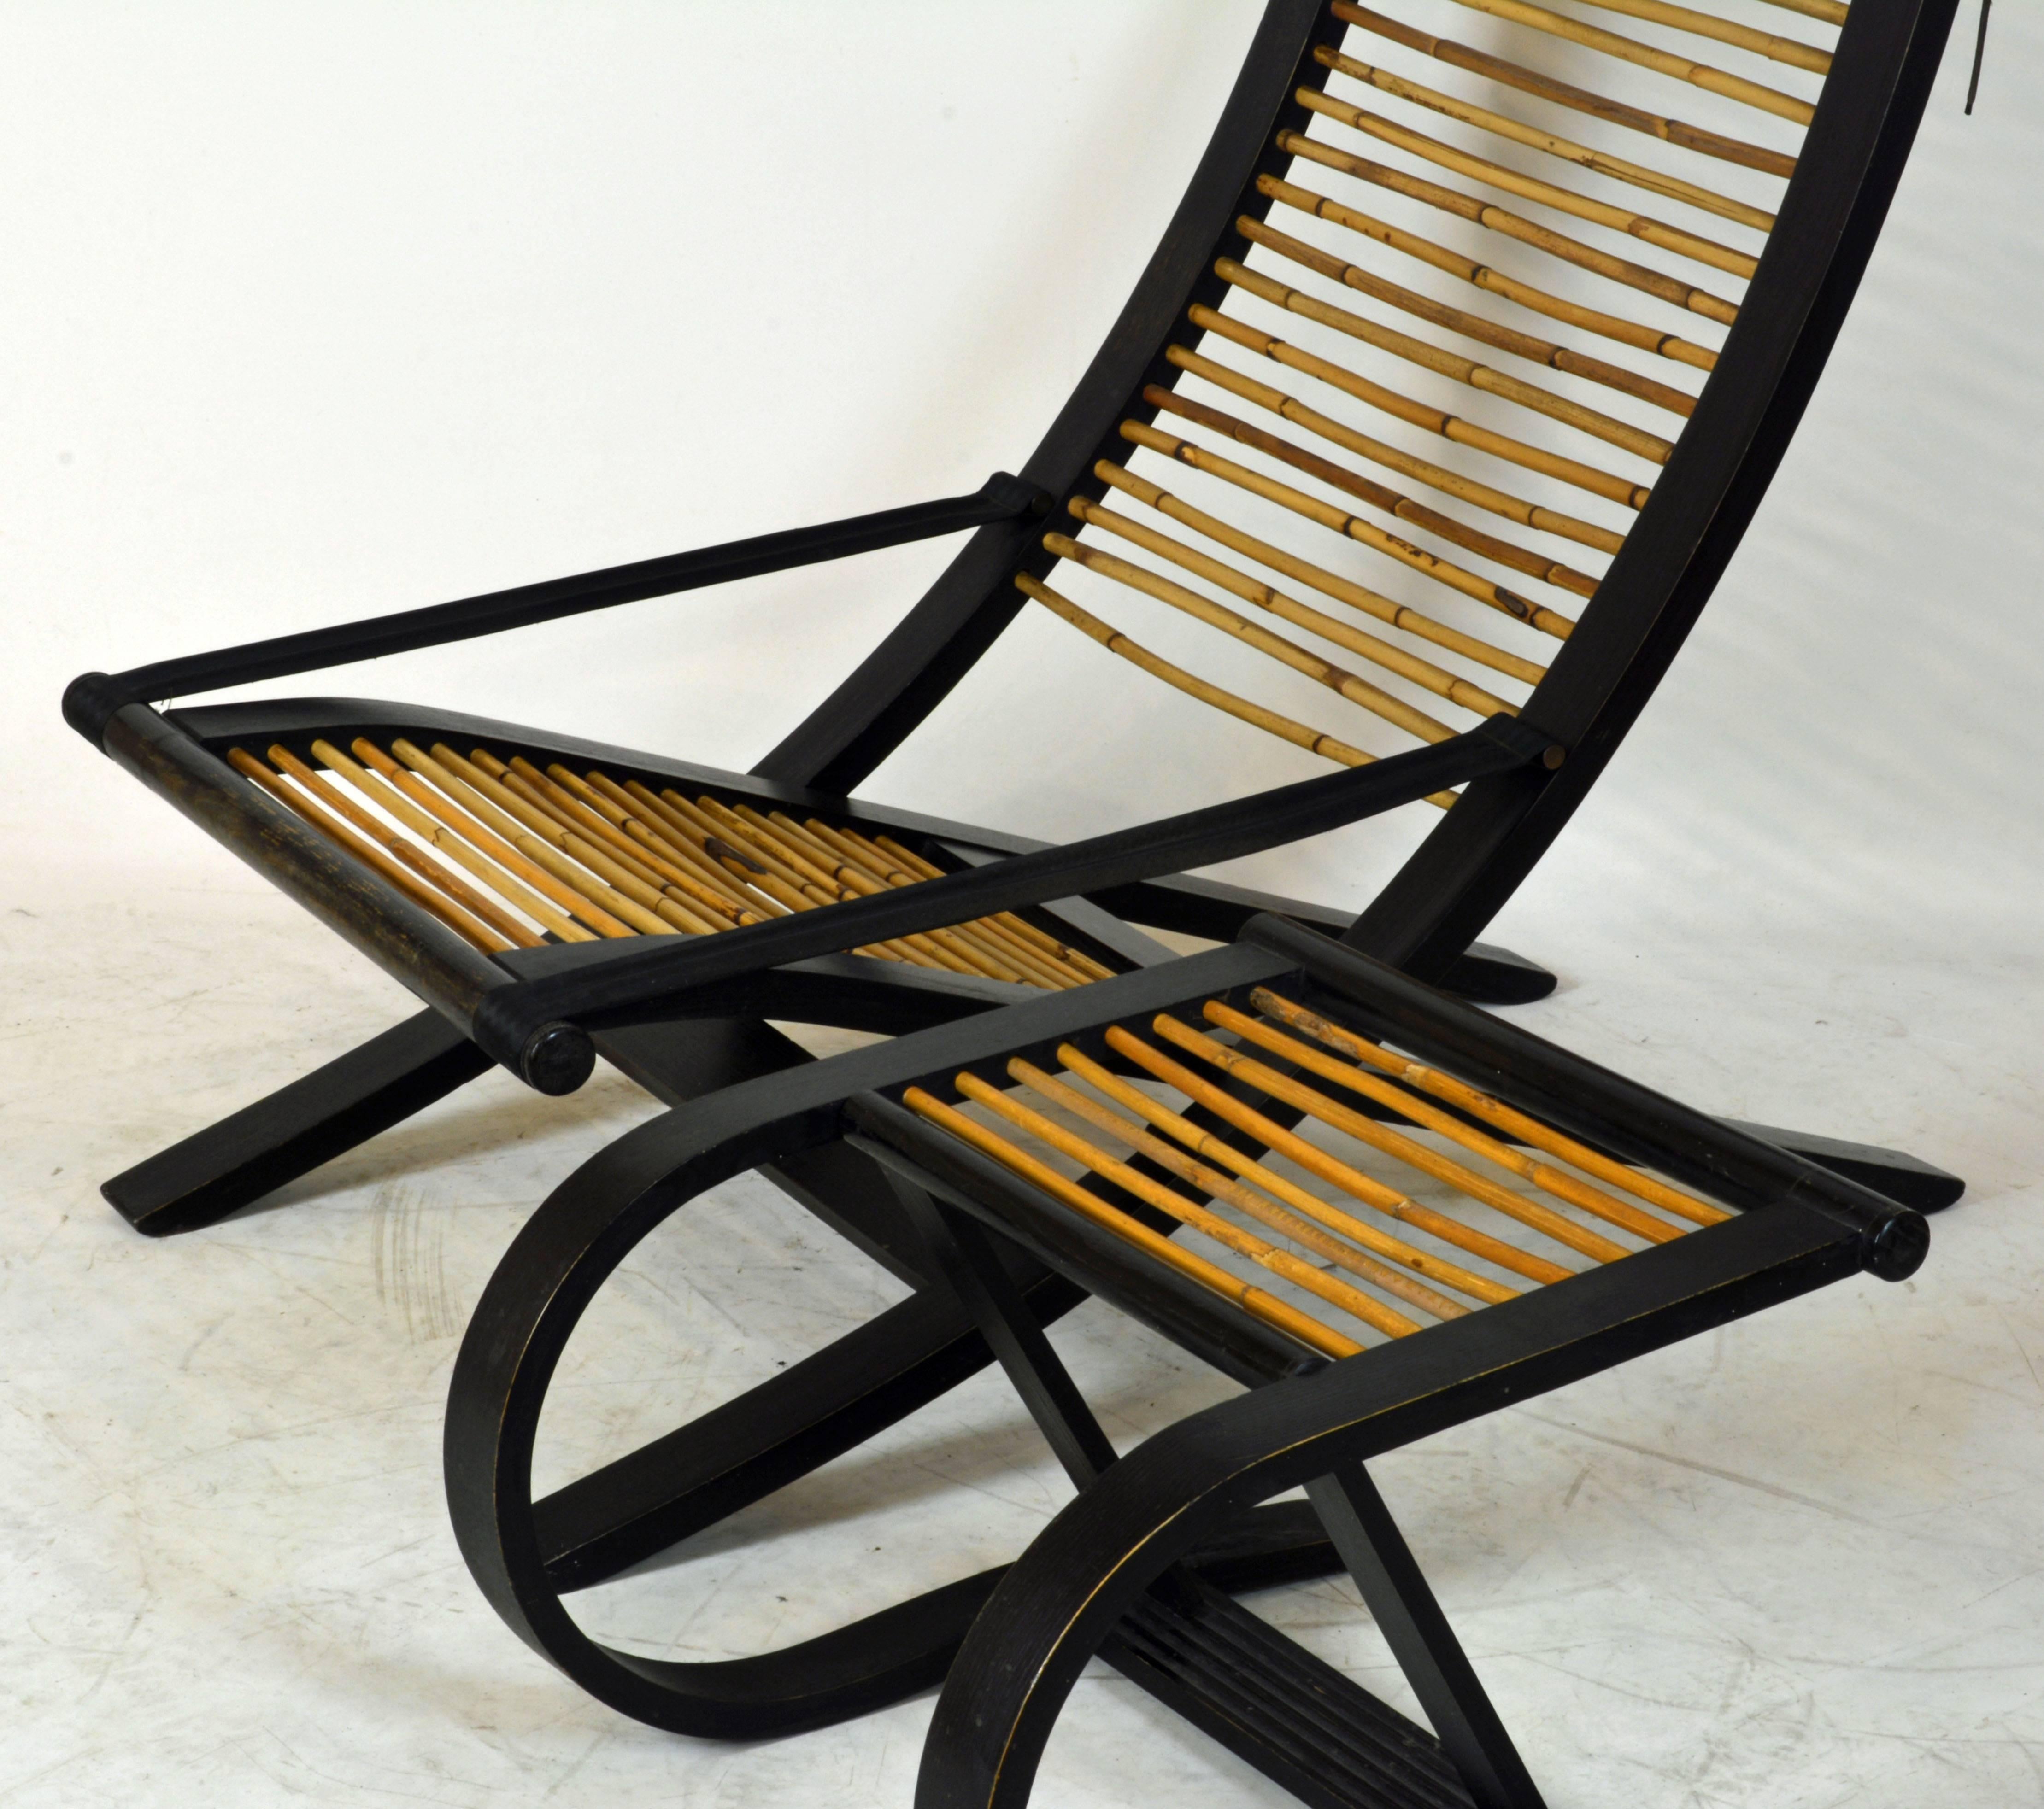 Modern Iconic C1 Reclining Lounge Chair and Foot Stool Designed by David Colwell